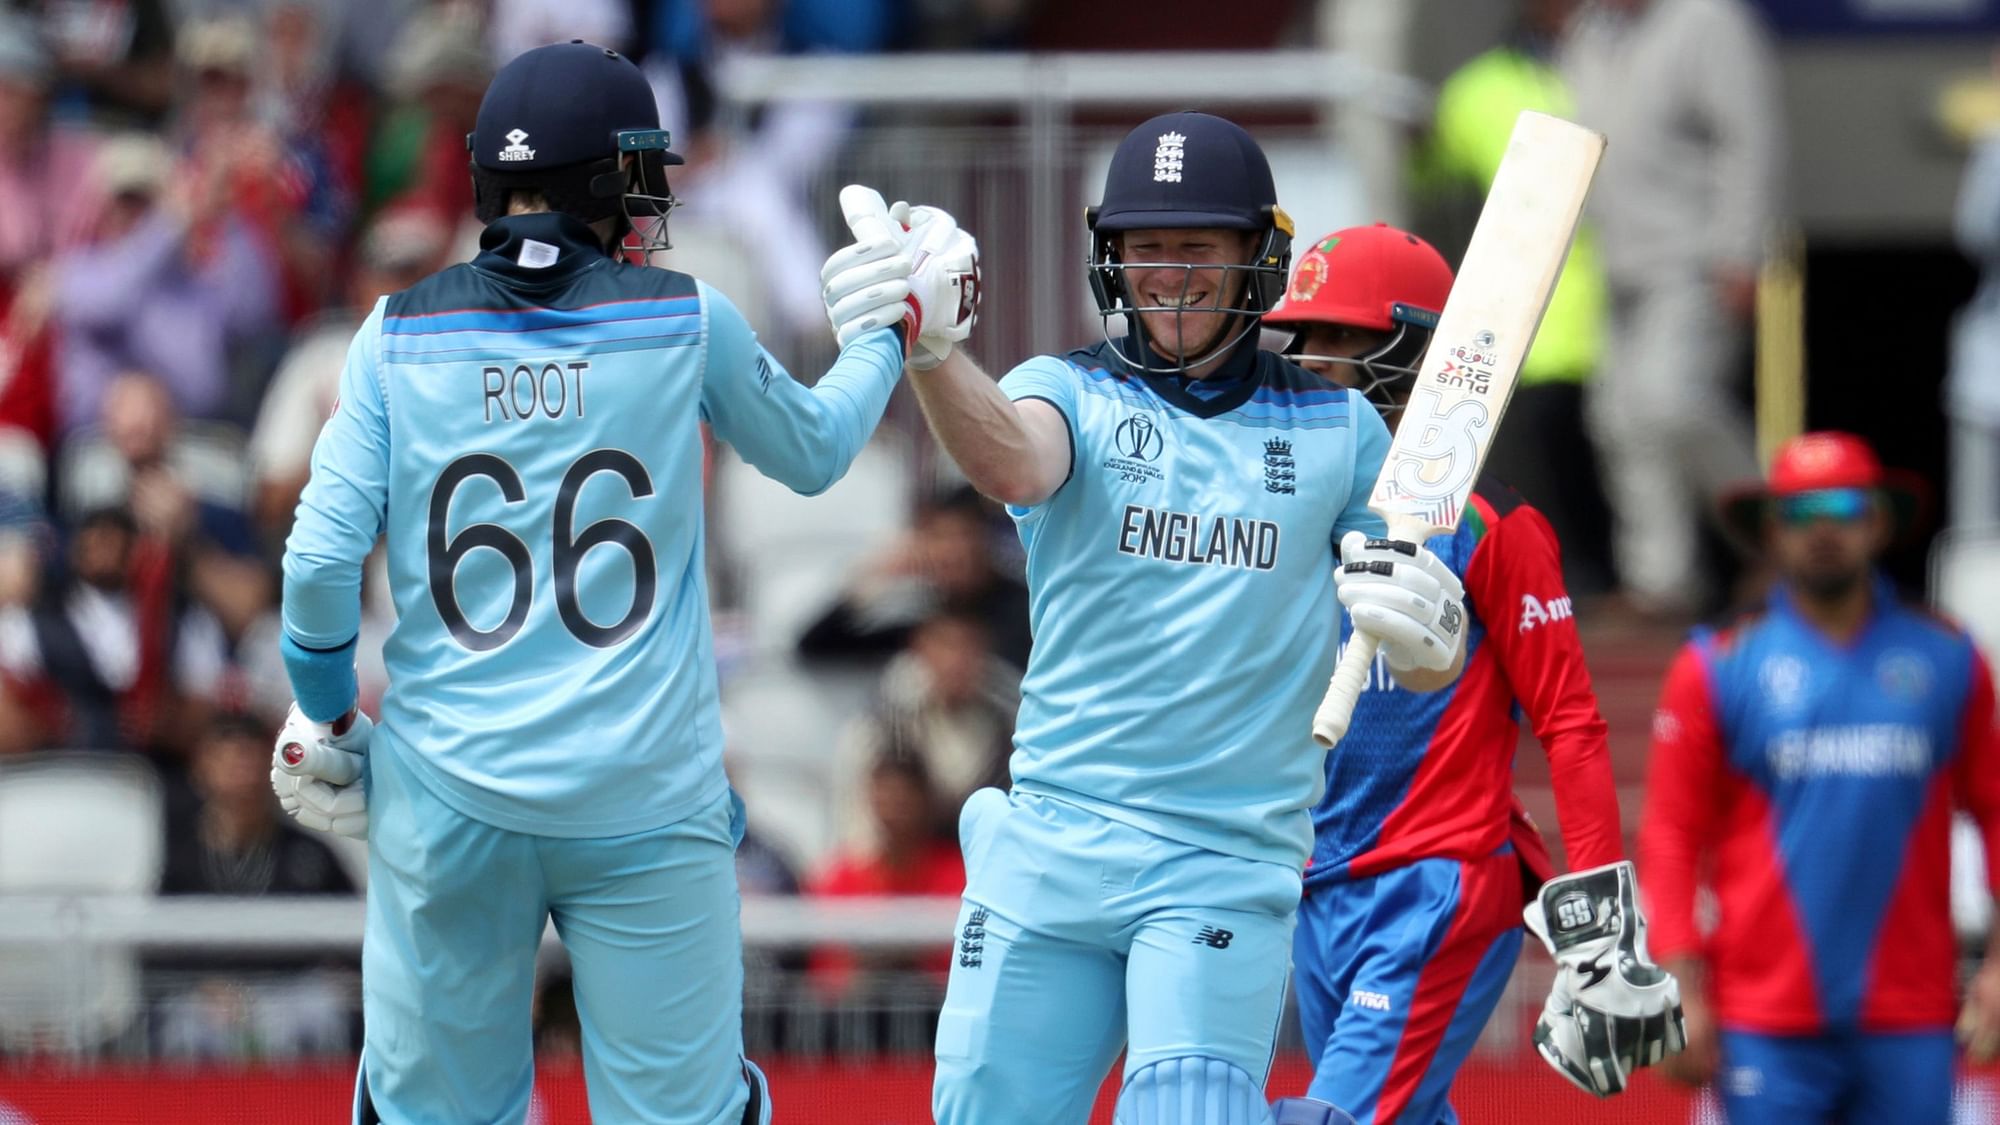 Captain Eoin Morgan’s 71-ball 148 along with Joe Root and Jonny Bairstow fired England to their highest Word Cup total.